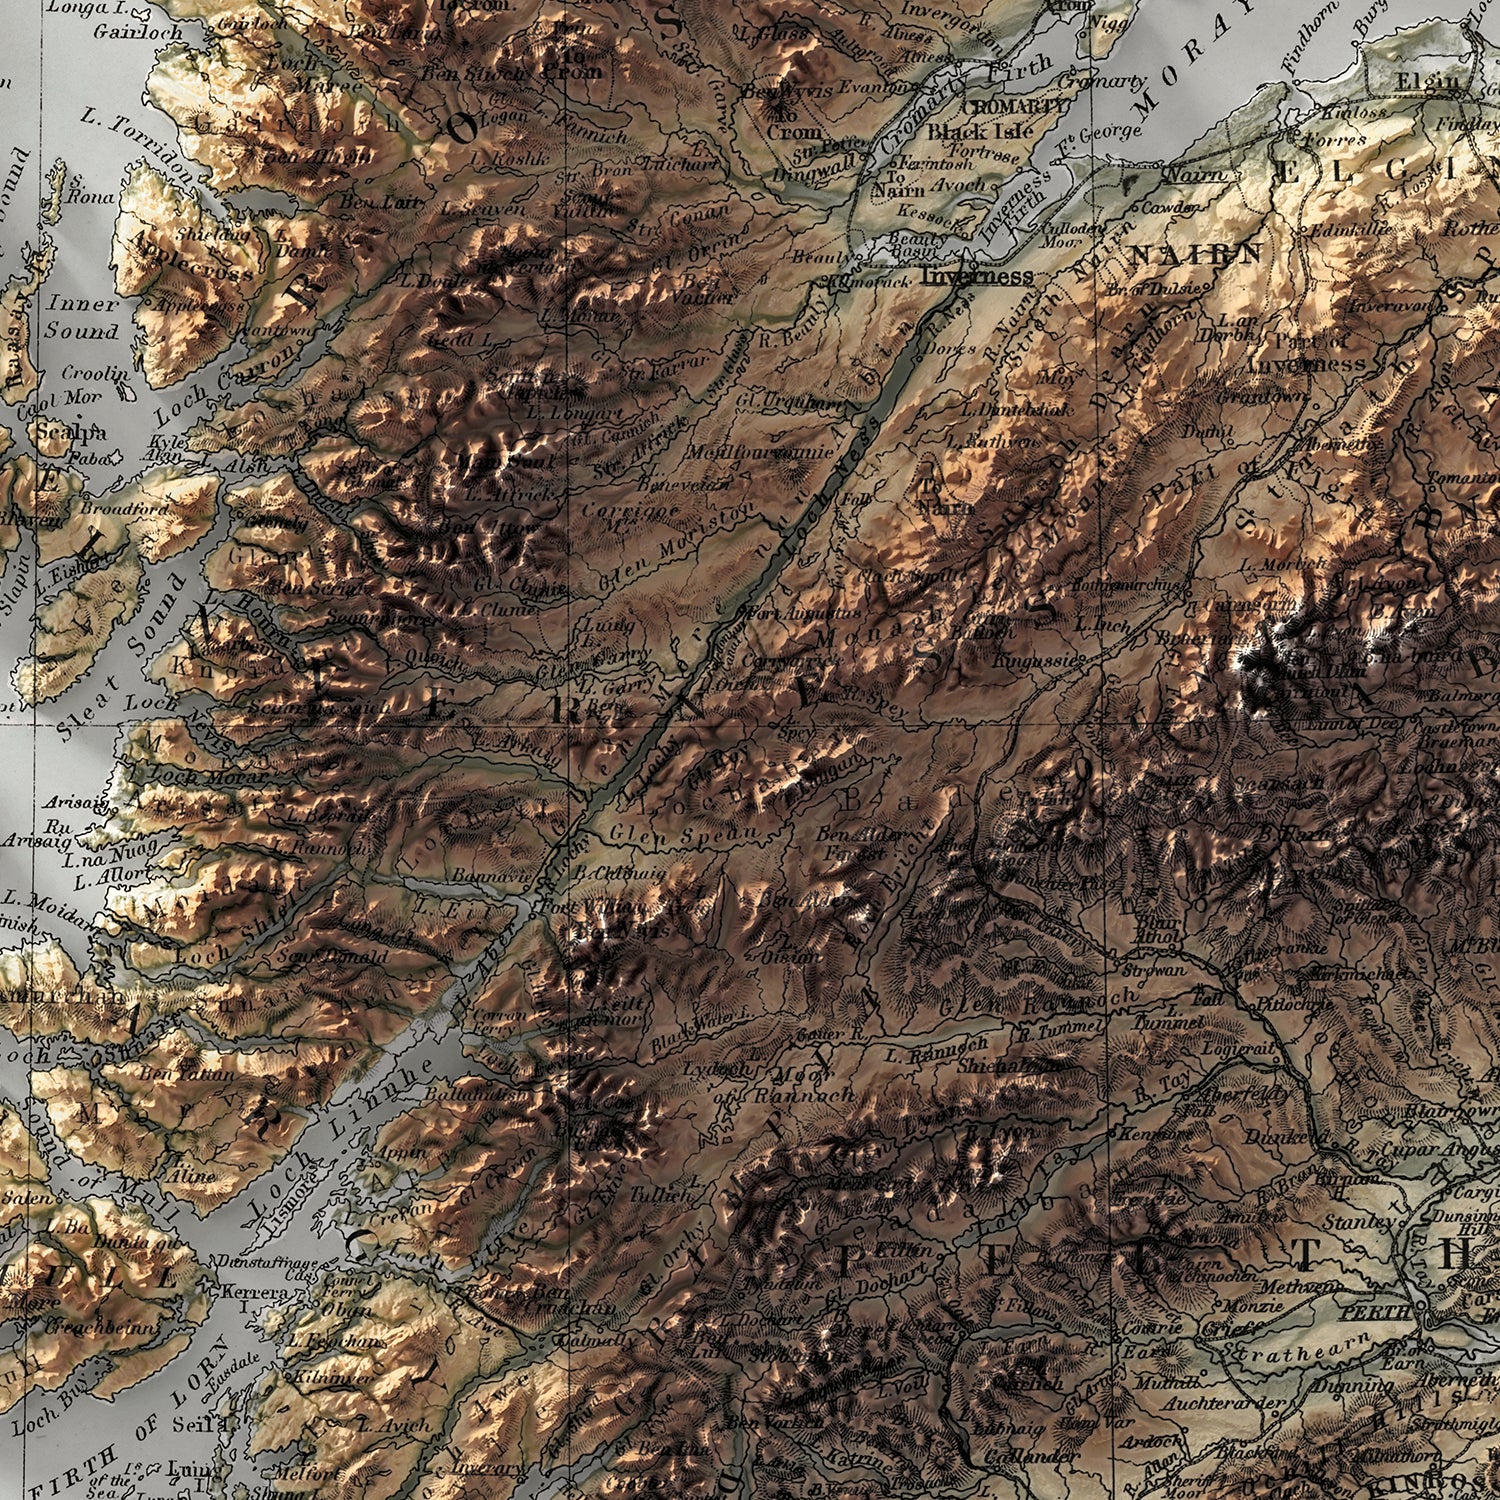 Scotland - Vintage Shaded Relief Map (1871)